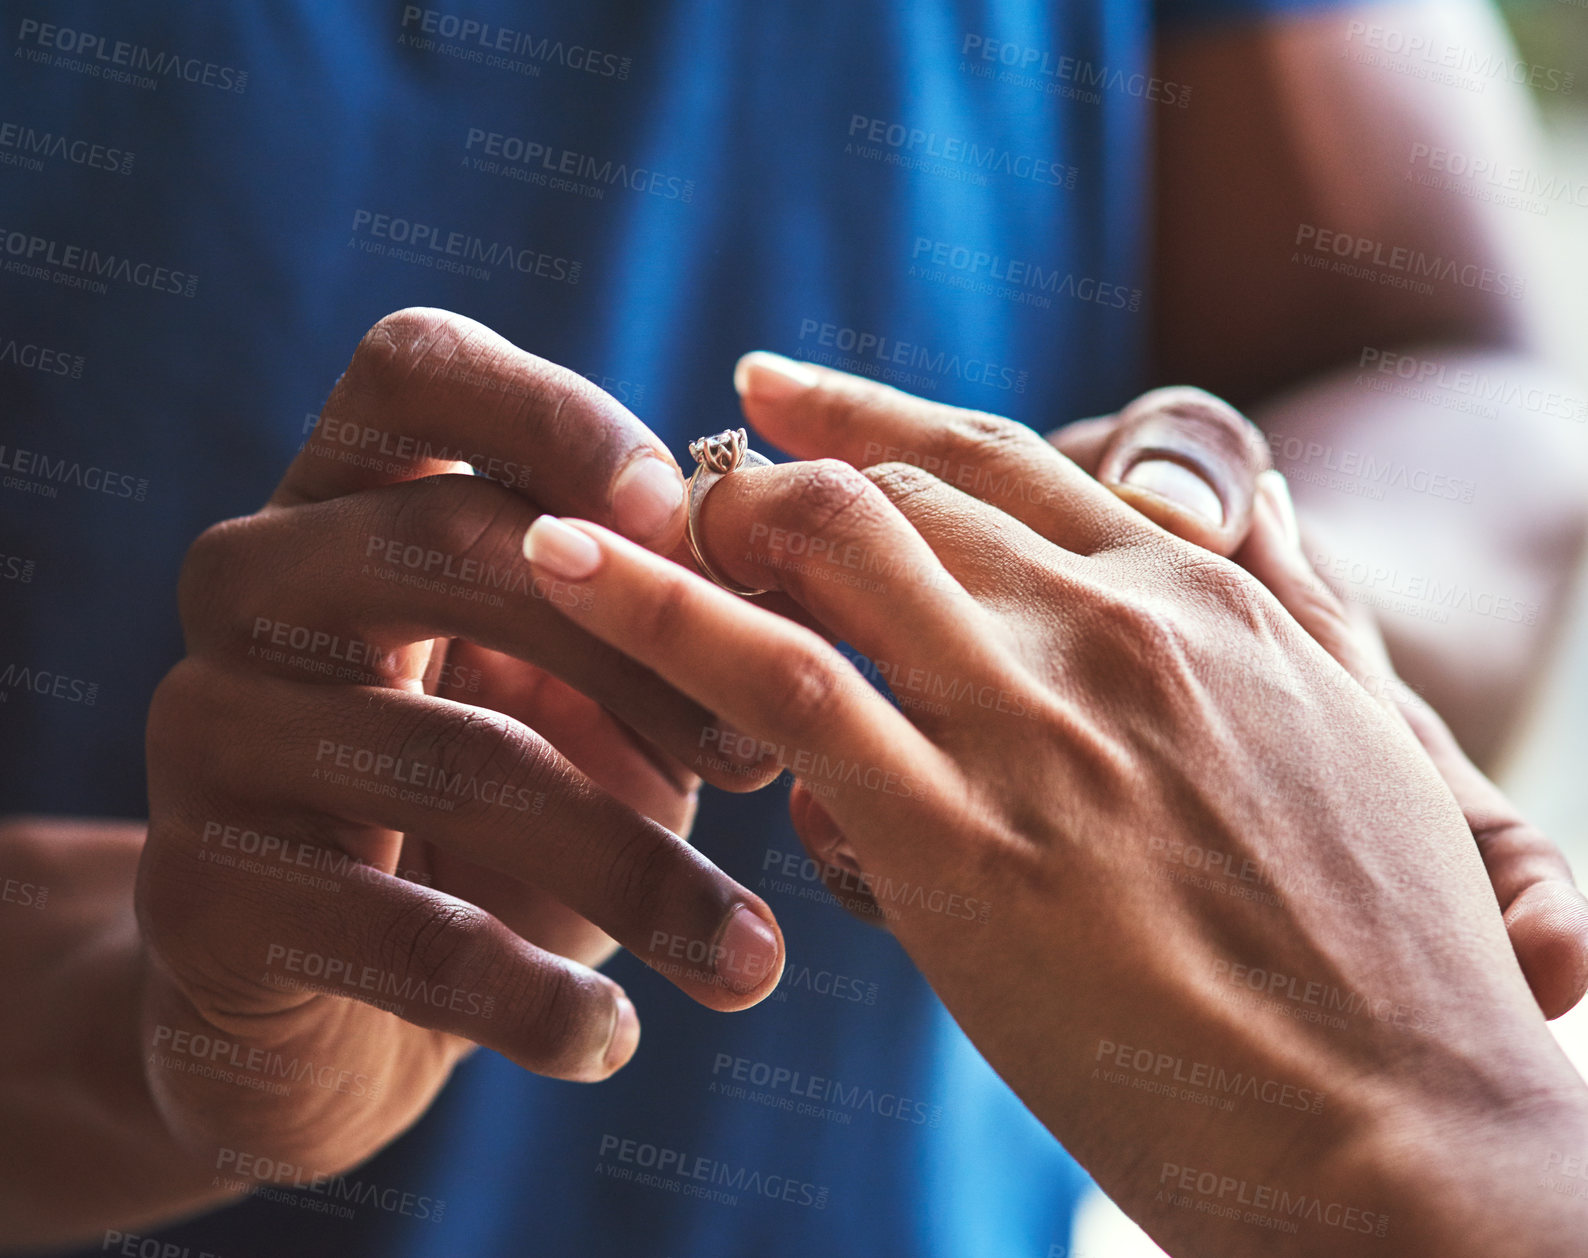 Buy stock photo Closeup shot of an unrecognizable man putting an engagement ring onto his fiancee’s finger